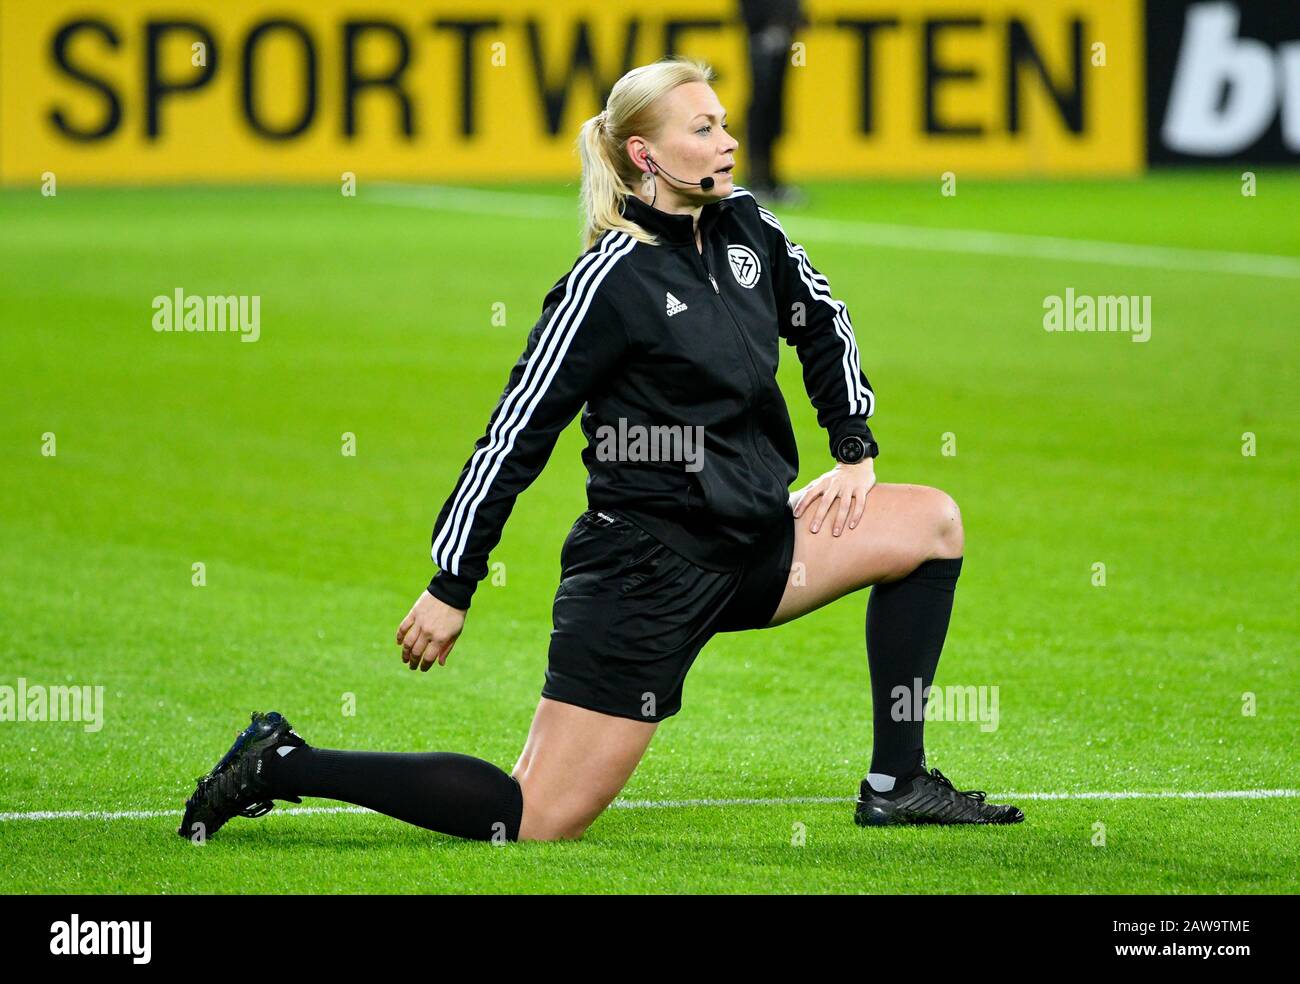 BayArena Leverkusen Germany,  5.2.2020, German football league cup Season 2019/20 round of 16,  Bayer 04 Leverkusen (B04) vs VfB Stuttgart (VFB): referree Bibiana Steinhaus stretches before the match                         DFB REGULATIONS PROHIBIT ANY USE OF PHOTOGRAPHS AS IMAGE SEQUENCES AND/OR QUASI-VIDEO Stock Photo